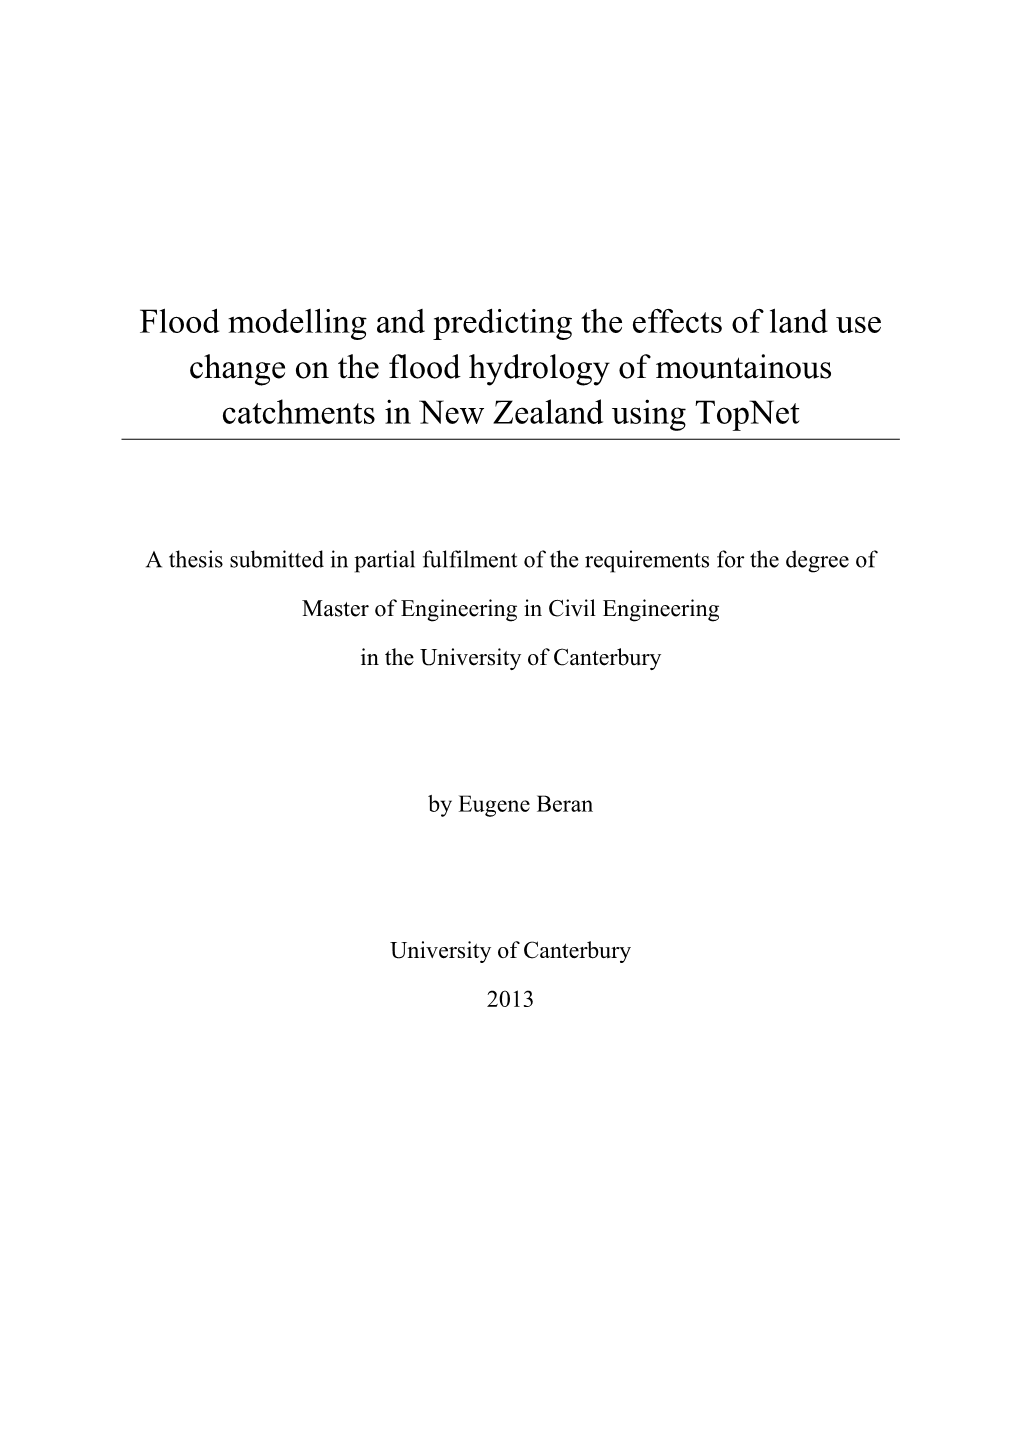 Flood Modelling and Predicting the Effects of Land Use Change on the Flood Hydrology of Mountainous Catchments in New Zealand Using Topnet